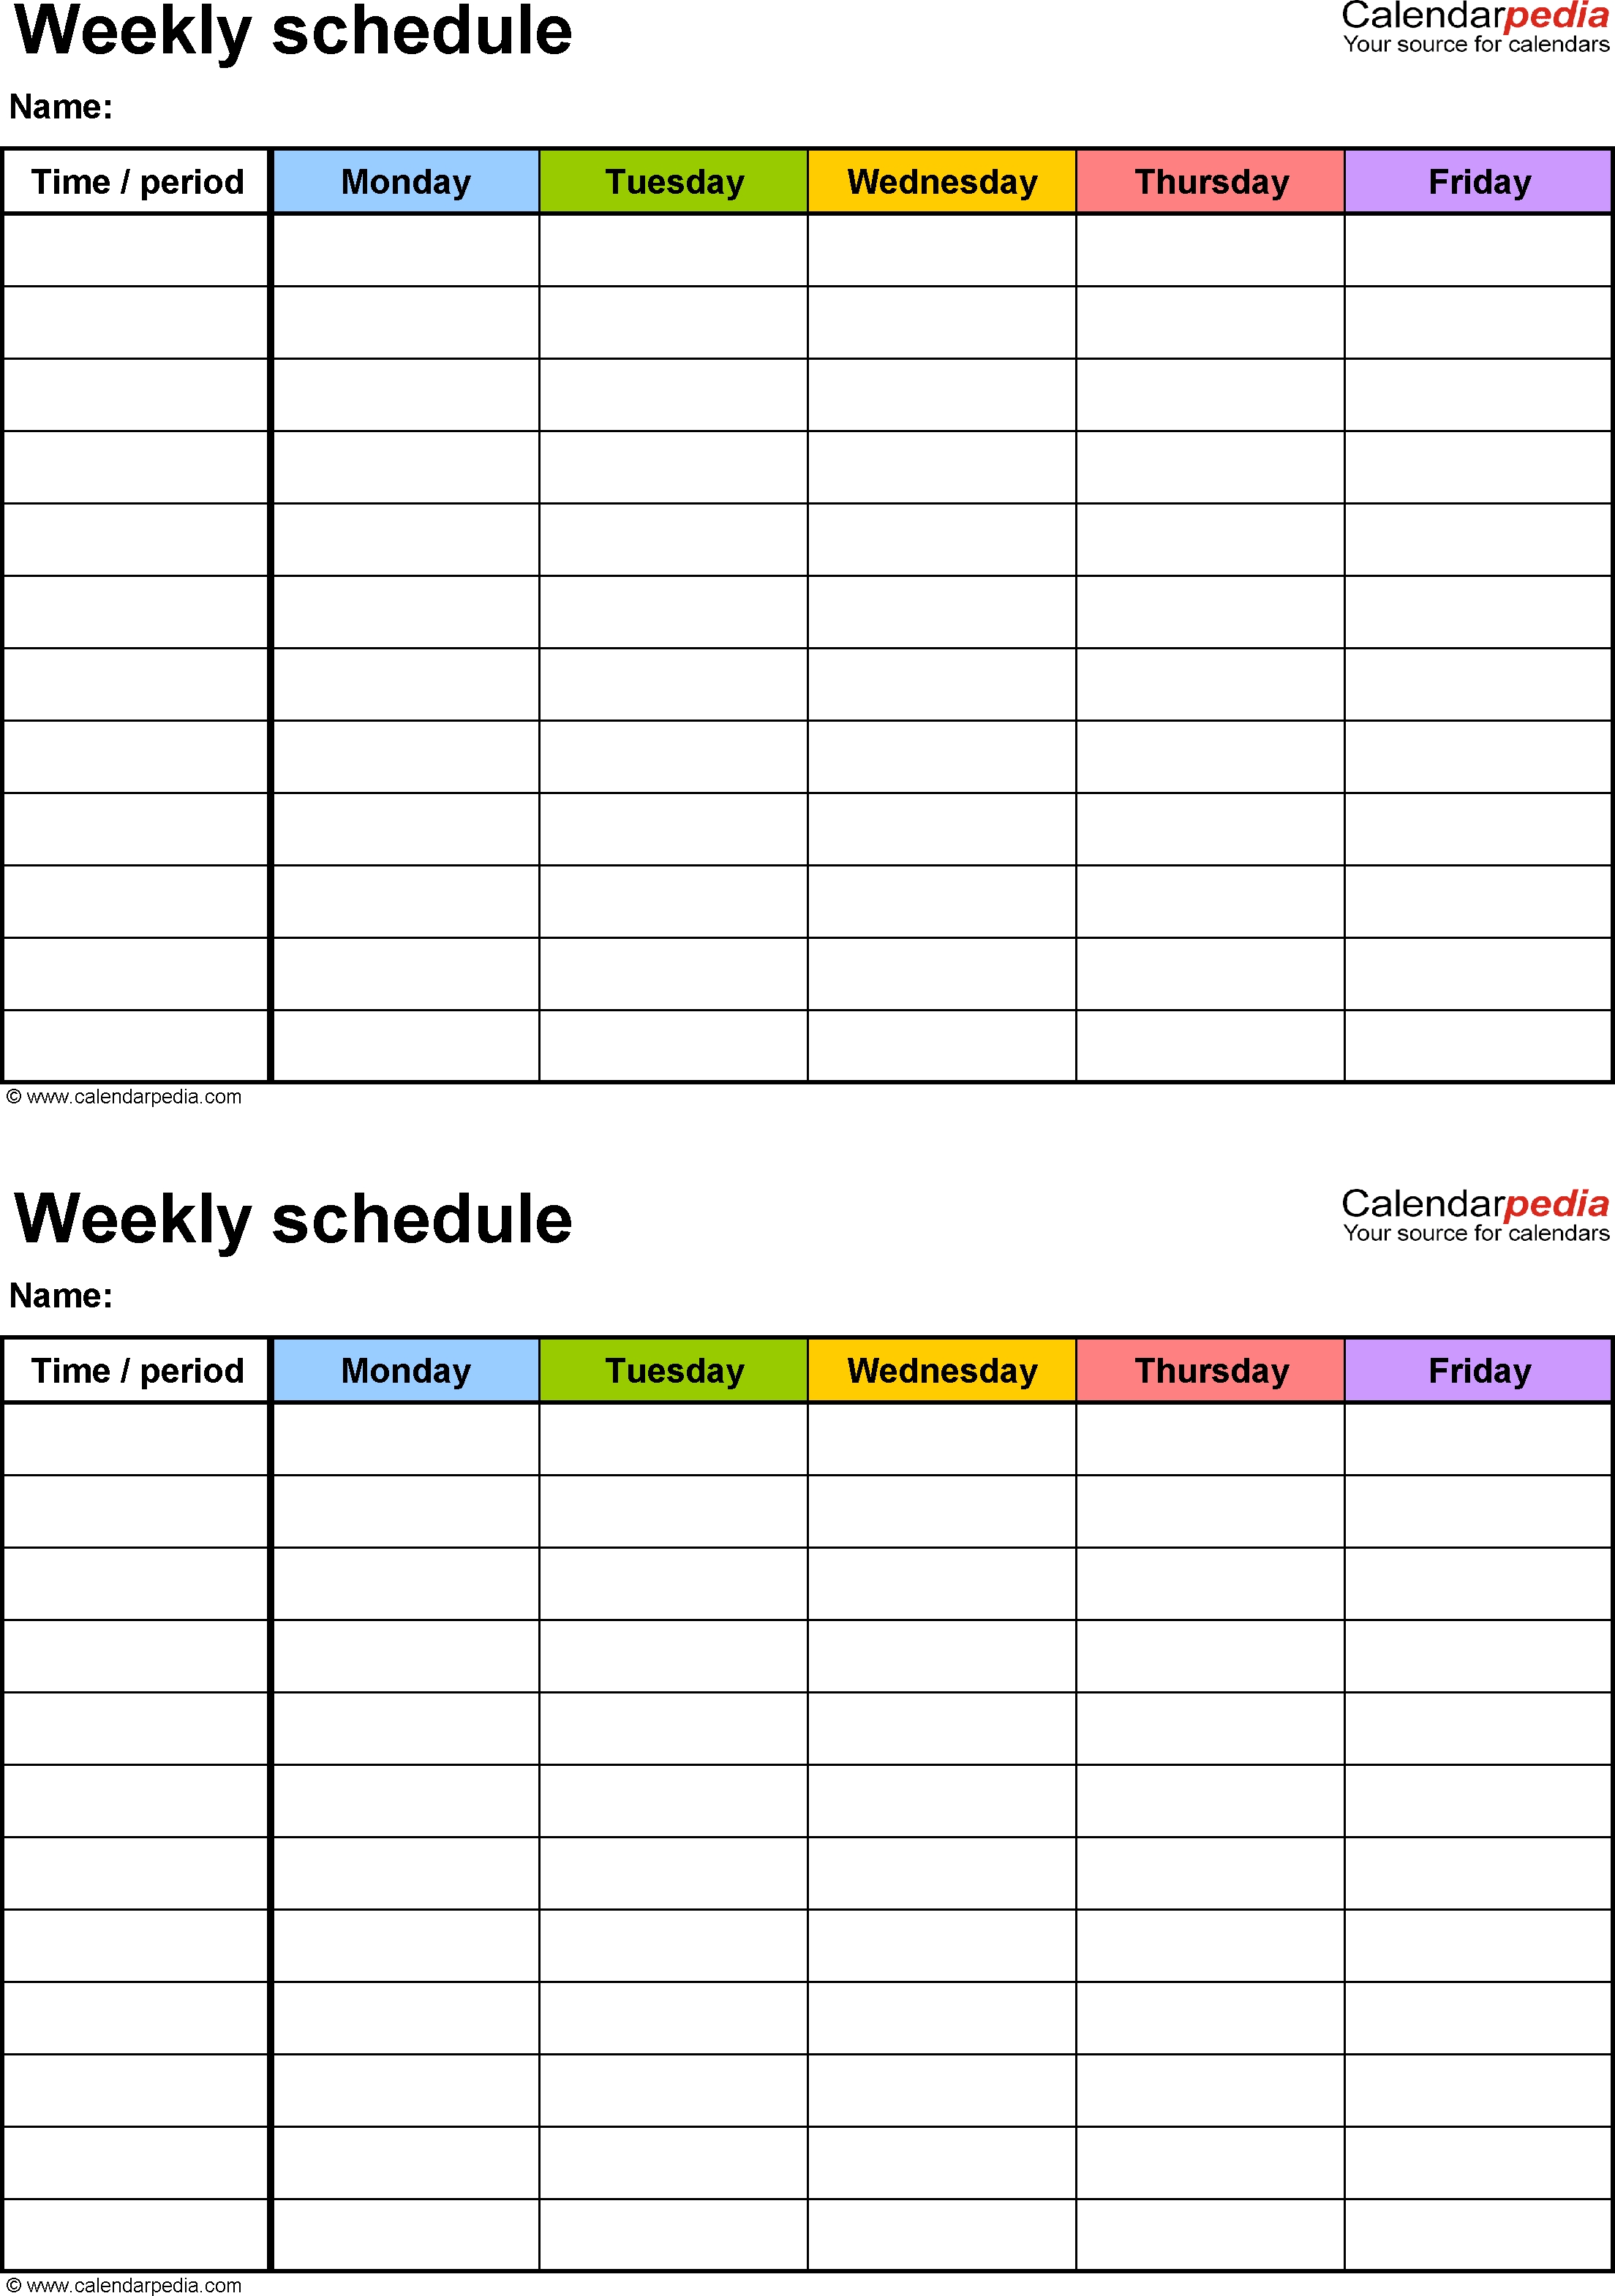 Free Weekly Schedule Templates For Excel - 18 Templates-Free 2 Page Calander Templates